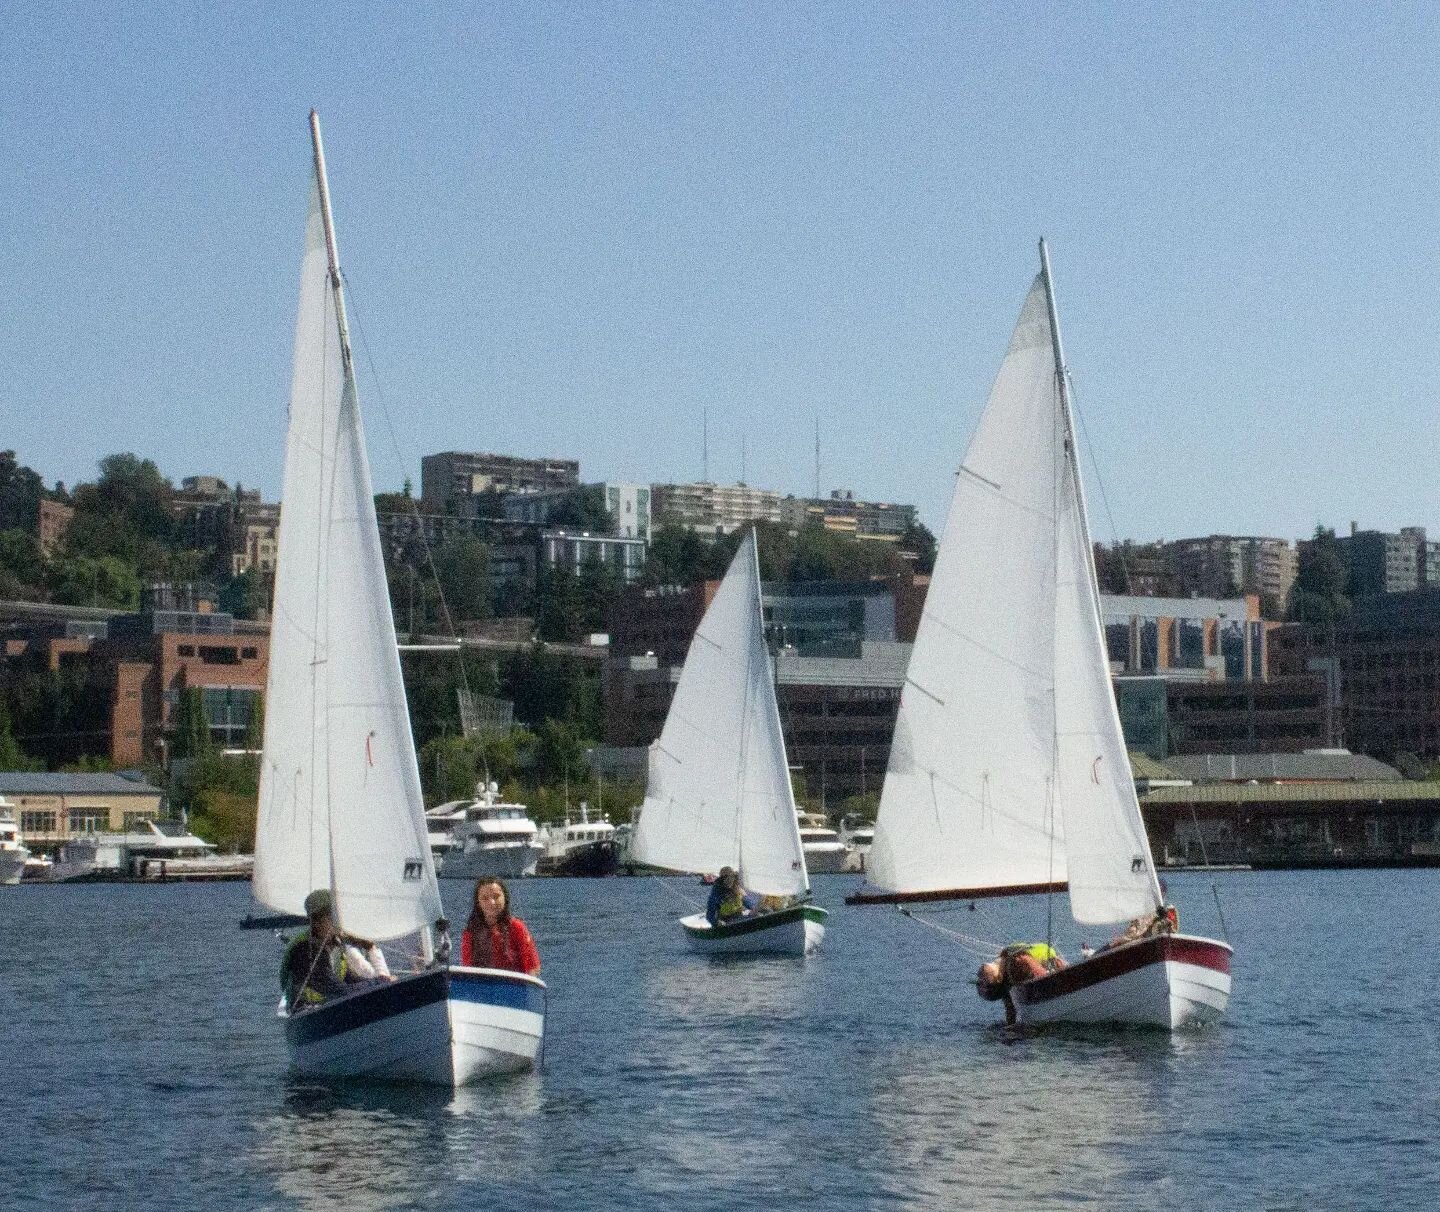 So excited to see our Lake Union Swifts (from&nbsp;@clcboats)&nbsp;in action this summer as part of our youth programming. These boats were built in our boatshop over the course of several summers by youth interns from local high schools, now used by